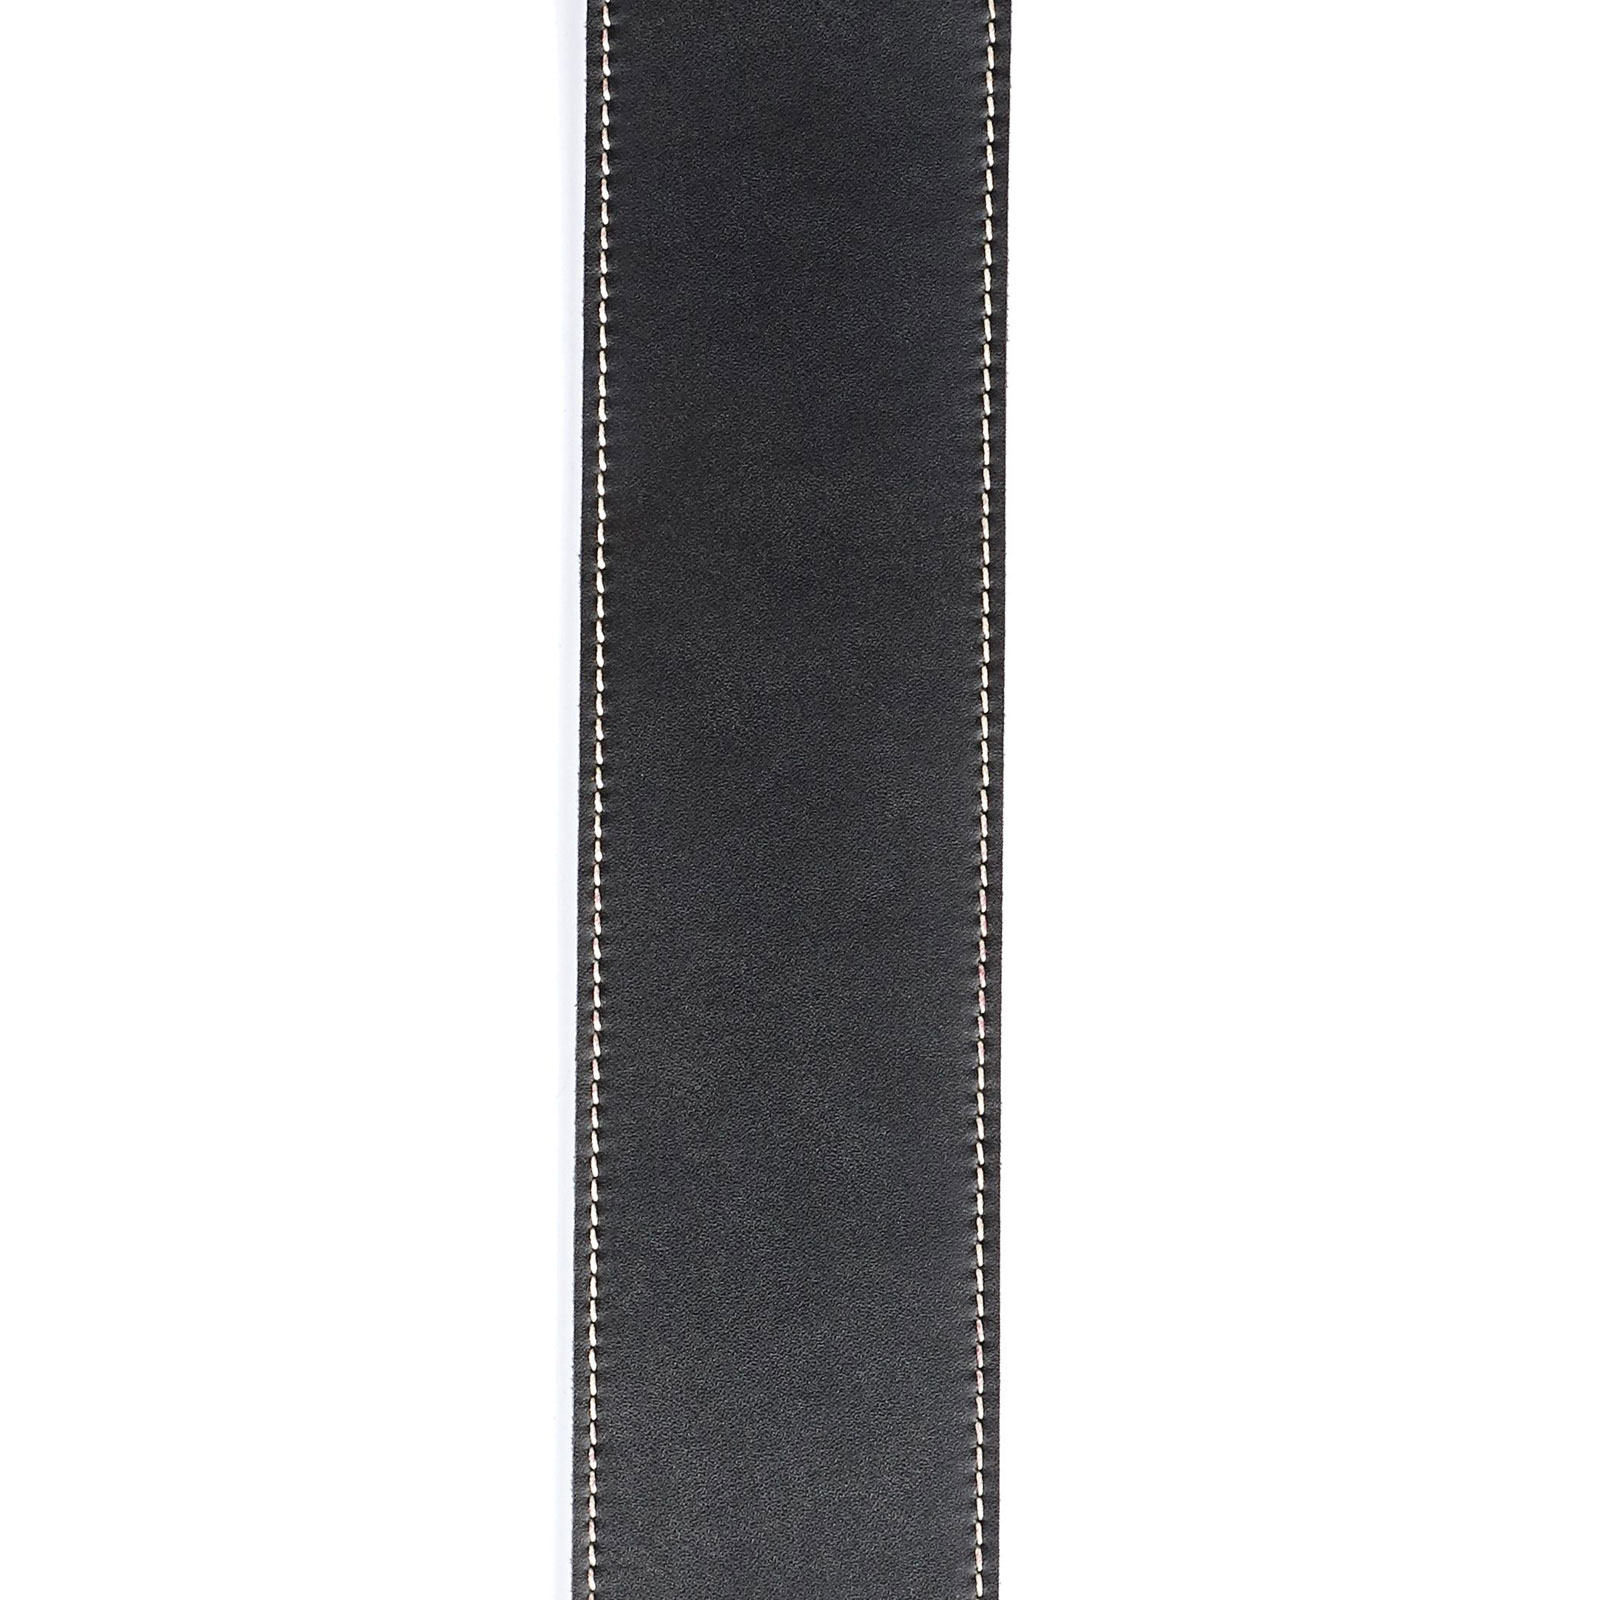 CLASSIC LEATHER GUITAR STRAP WITH CONTRAST STITCH BLACK